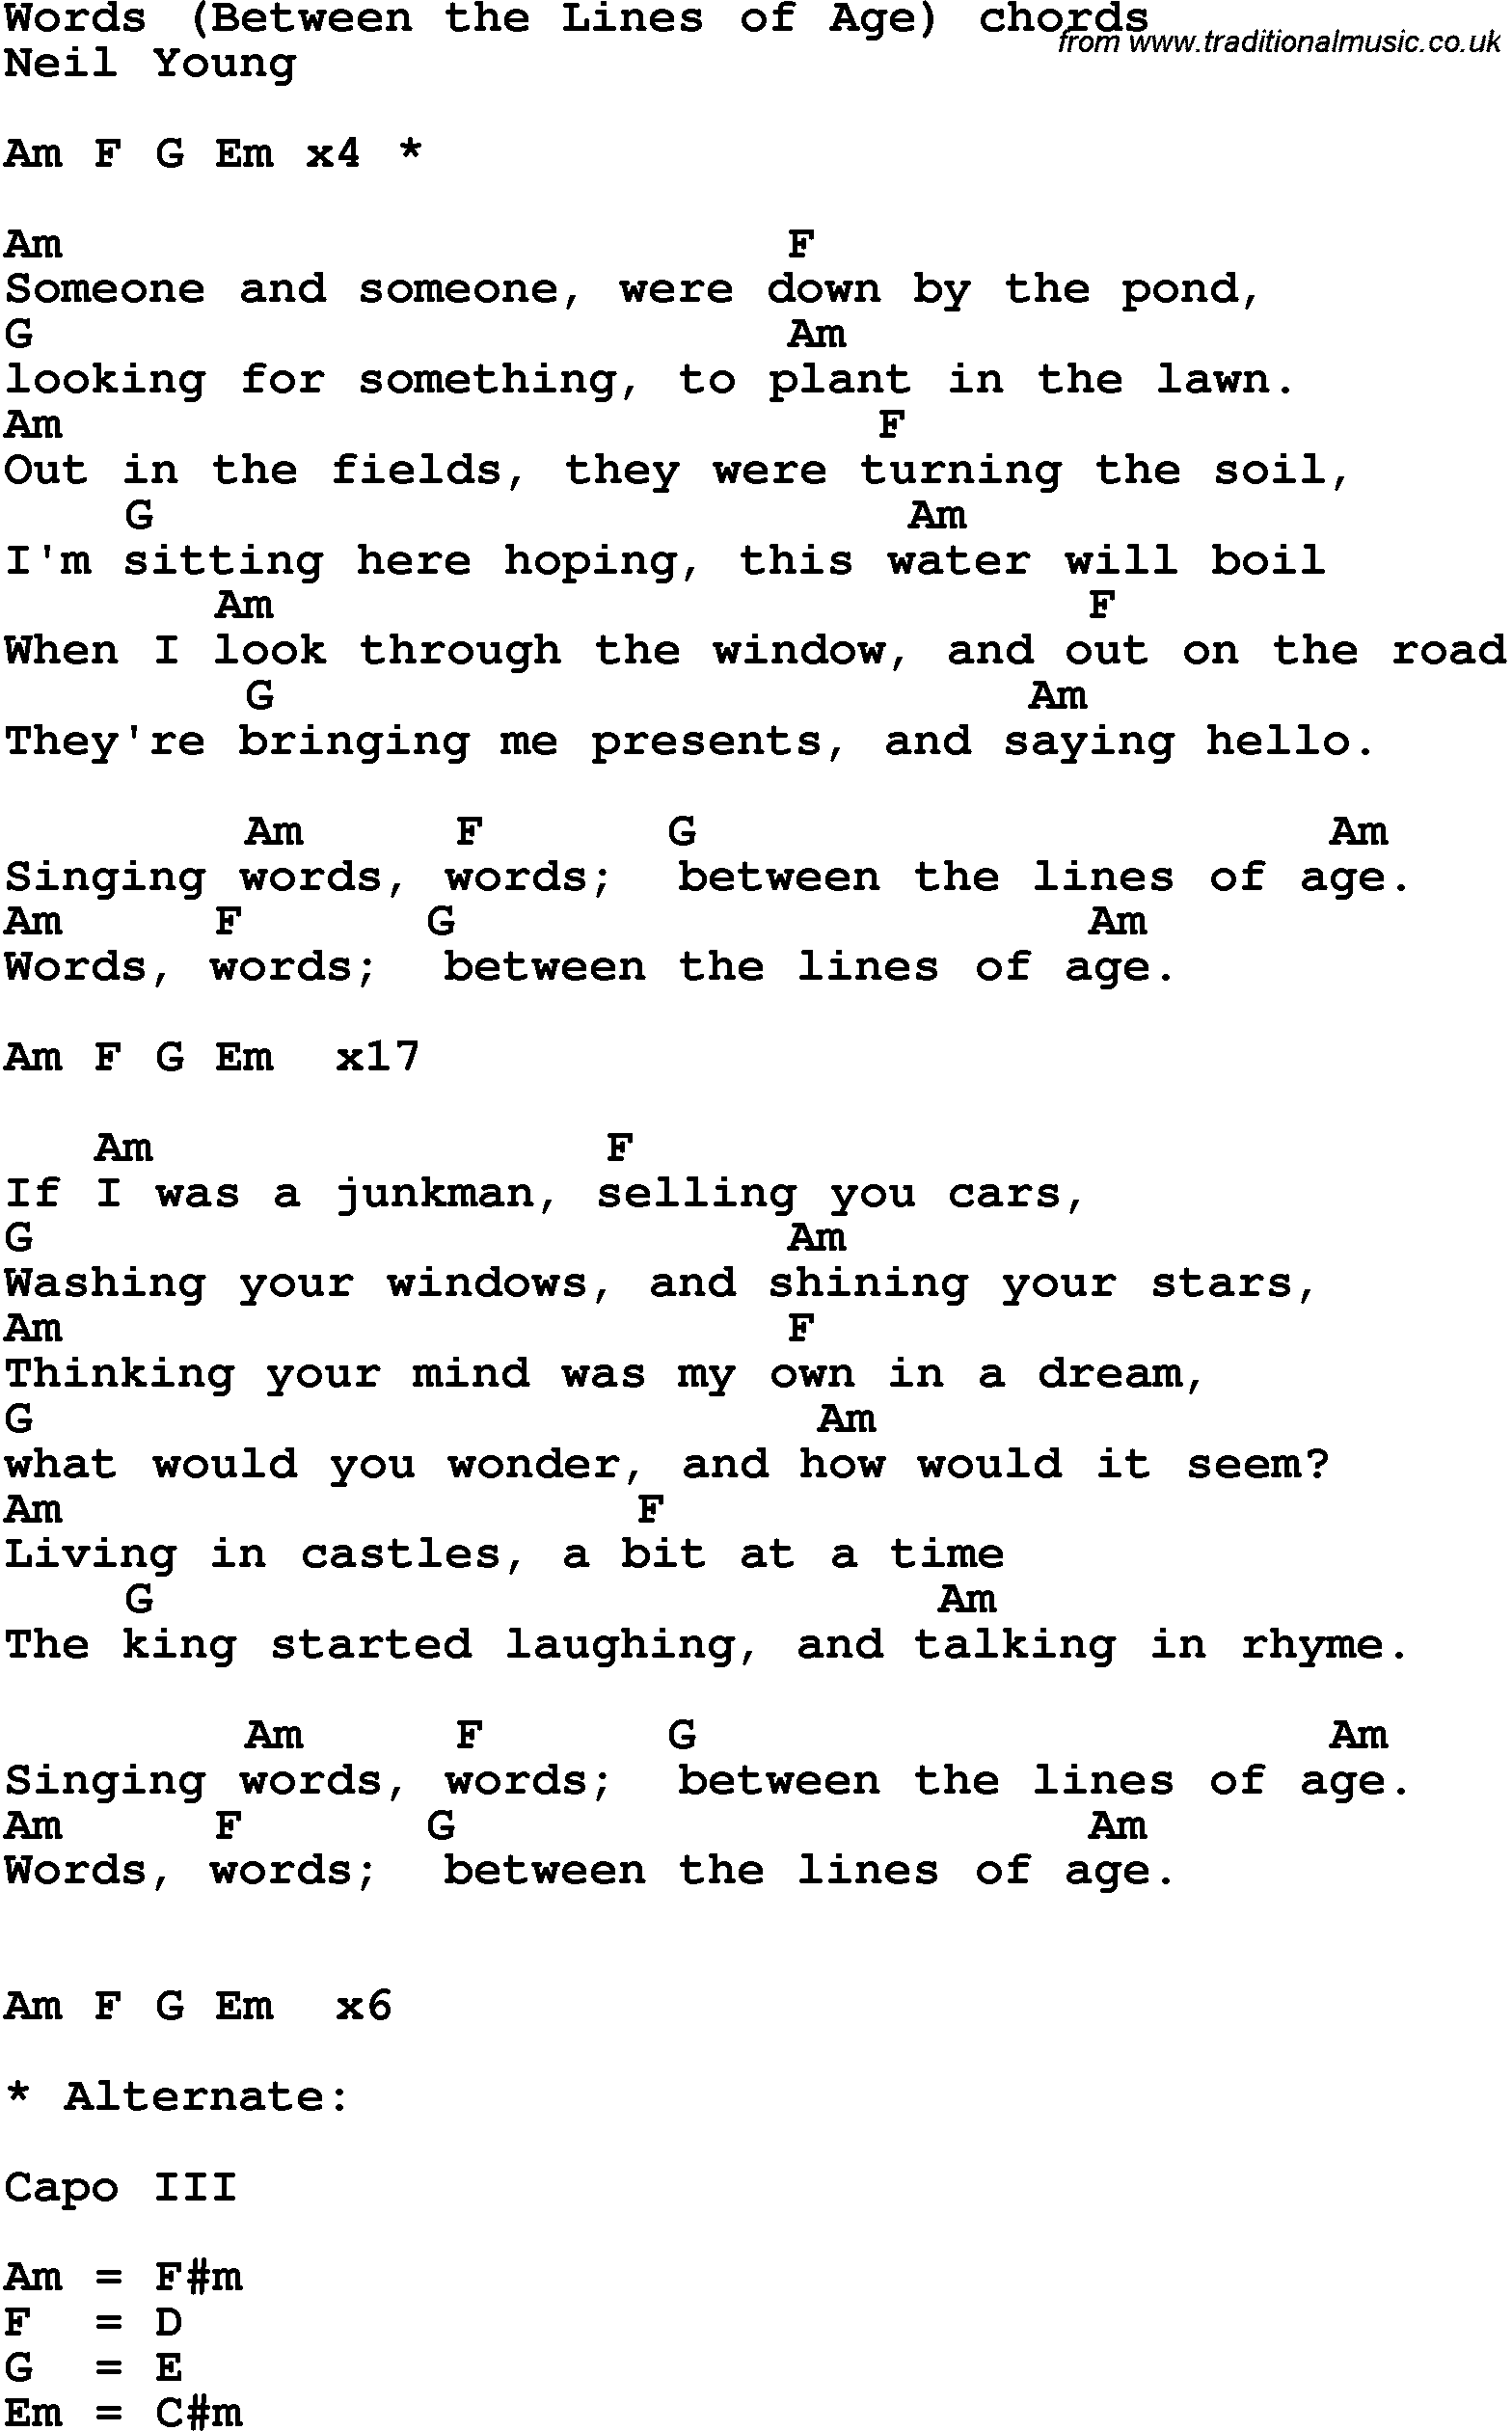 Song Lyrics with guitar chords for Words(Between The Lines Of Age)